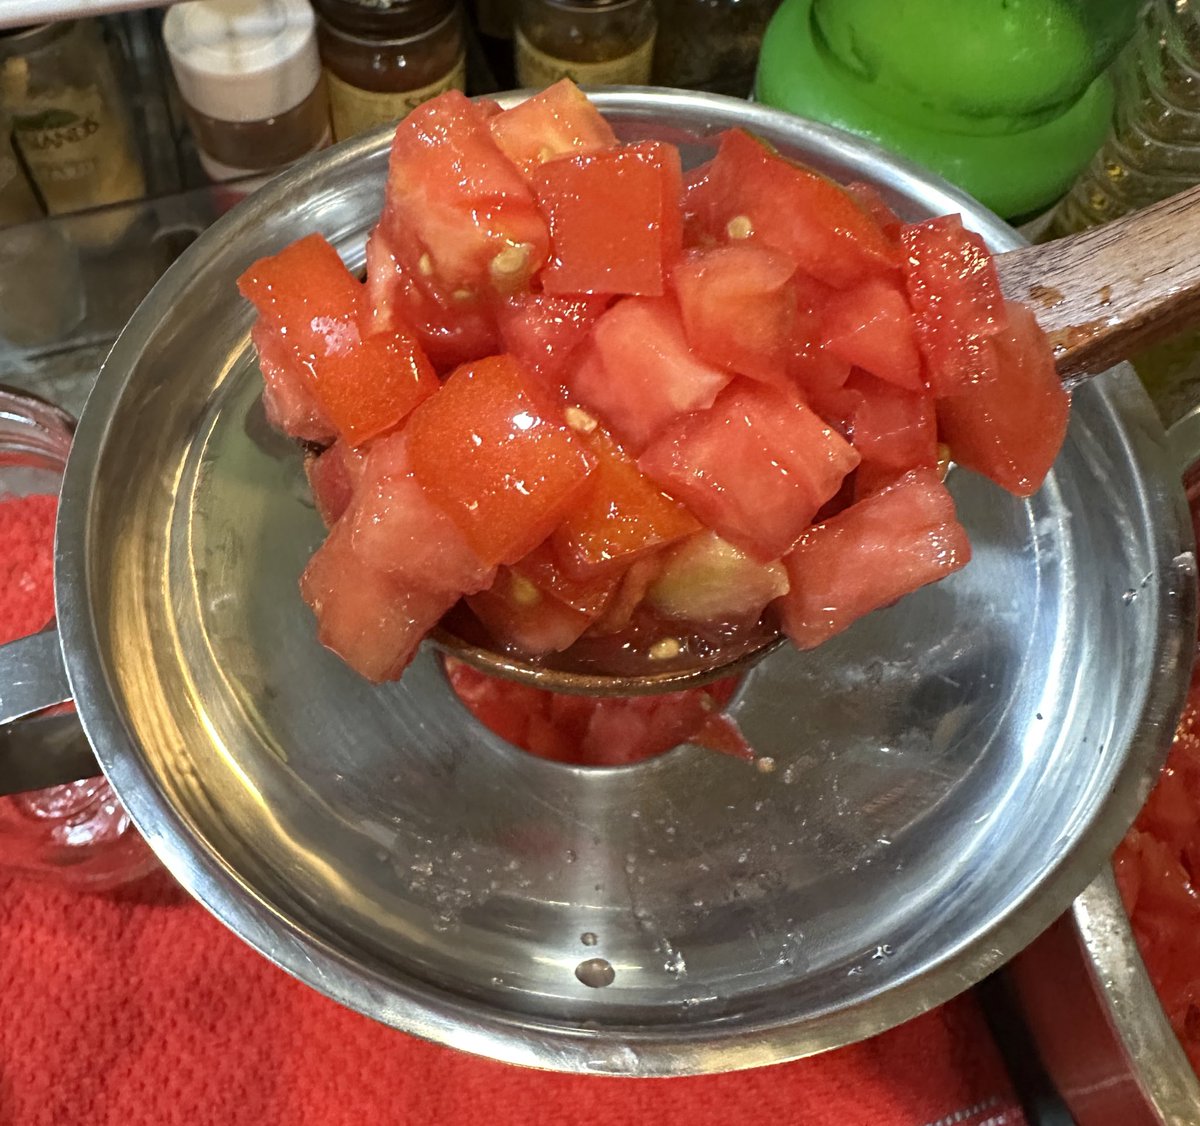 Canning some diced tomatoes, they’re fantastically delicious! Just a great batch:)
#homecanning #foodpreservation